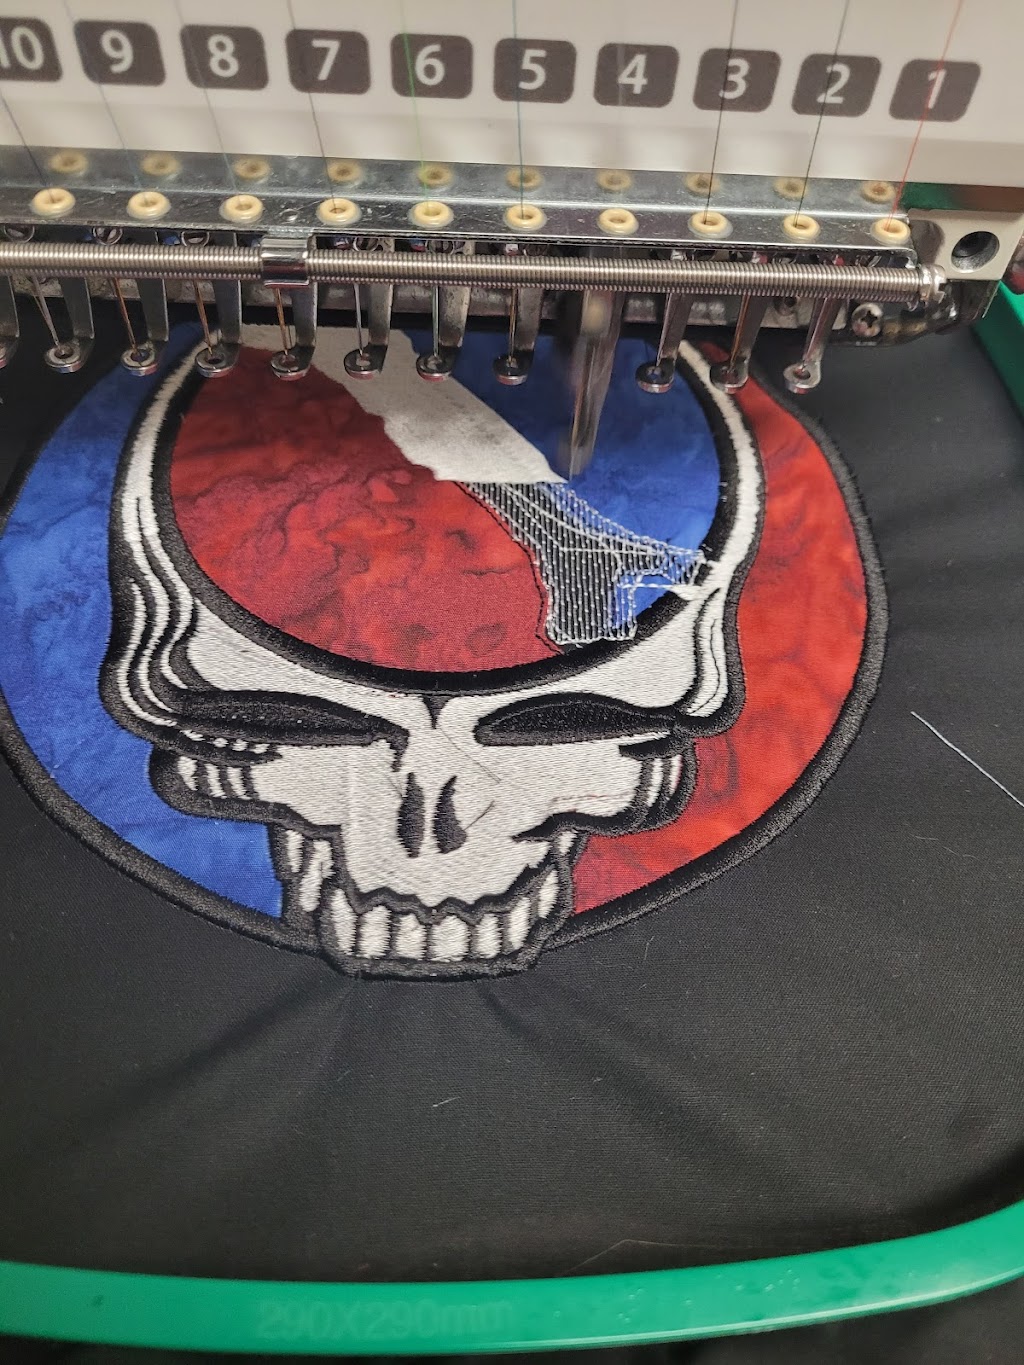 Independent Embroidery | 1069 Ringwood Ave, Haskell, NJ 07420 | Phone: (267) 971-0434